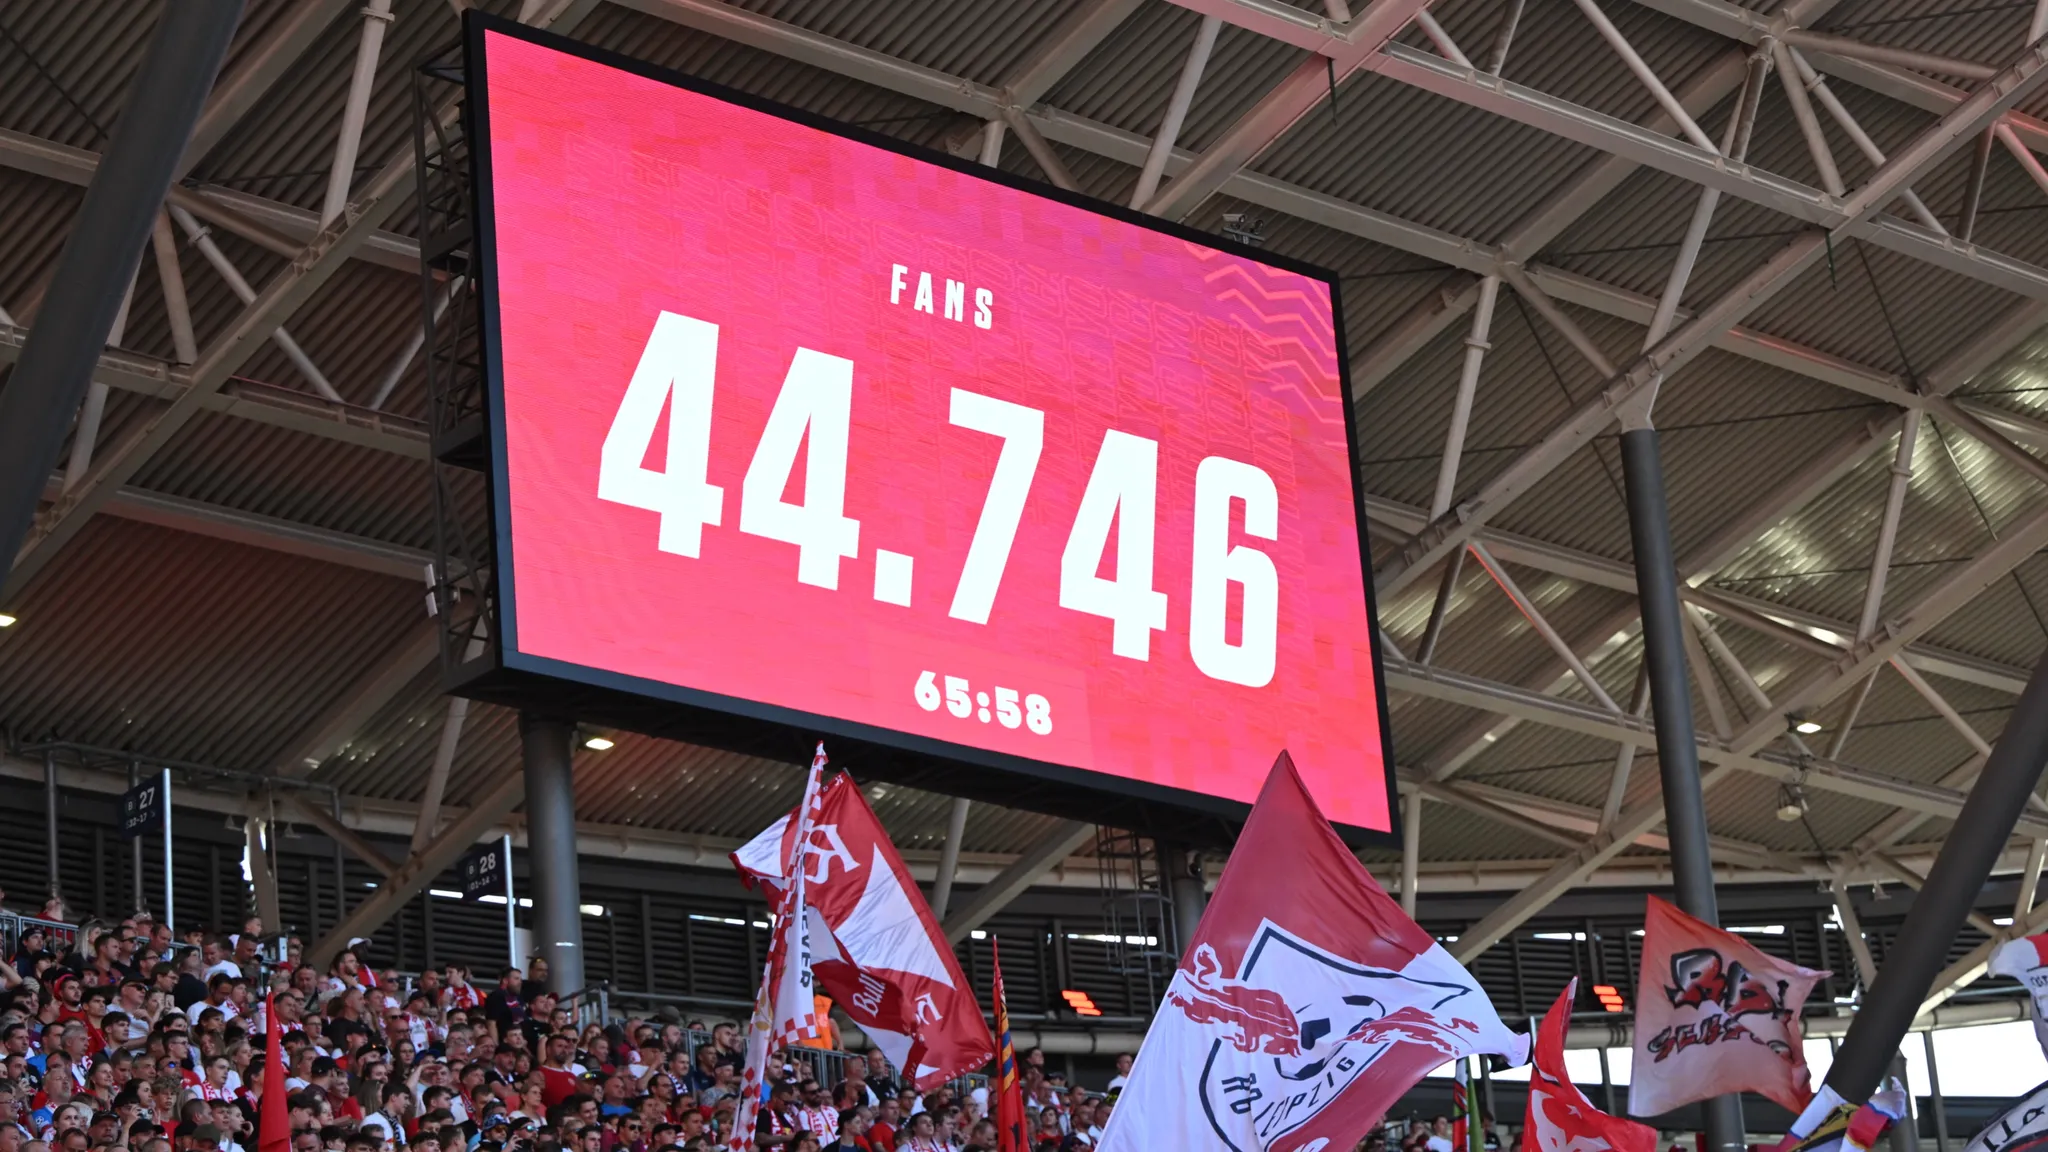 The bog screen at the Red Bull Arena displays the game's attendance: 44,746.